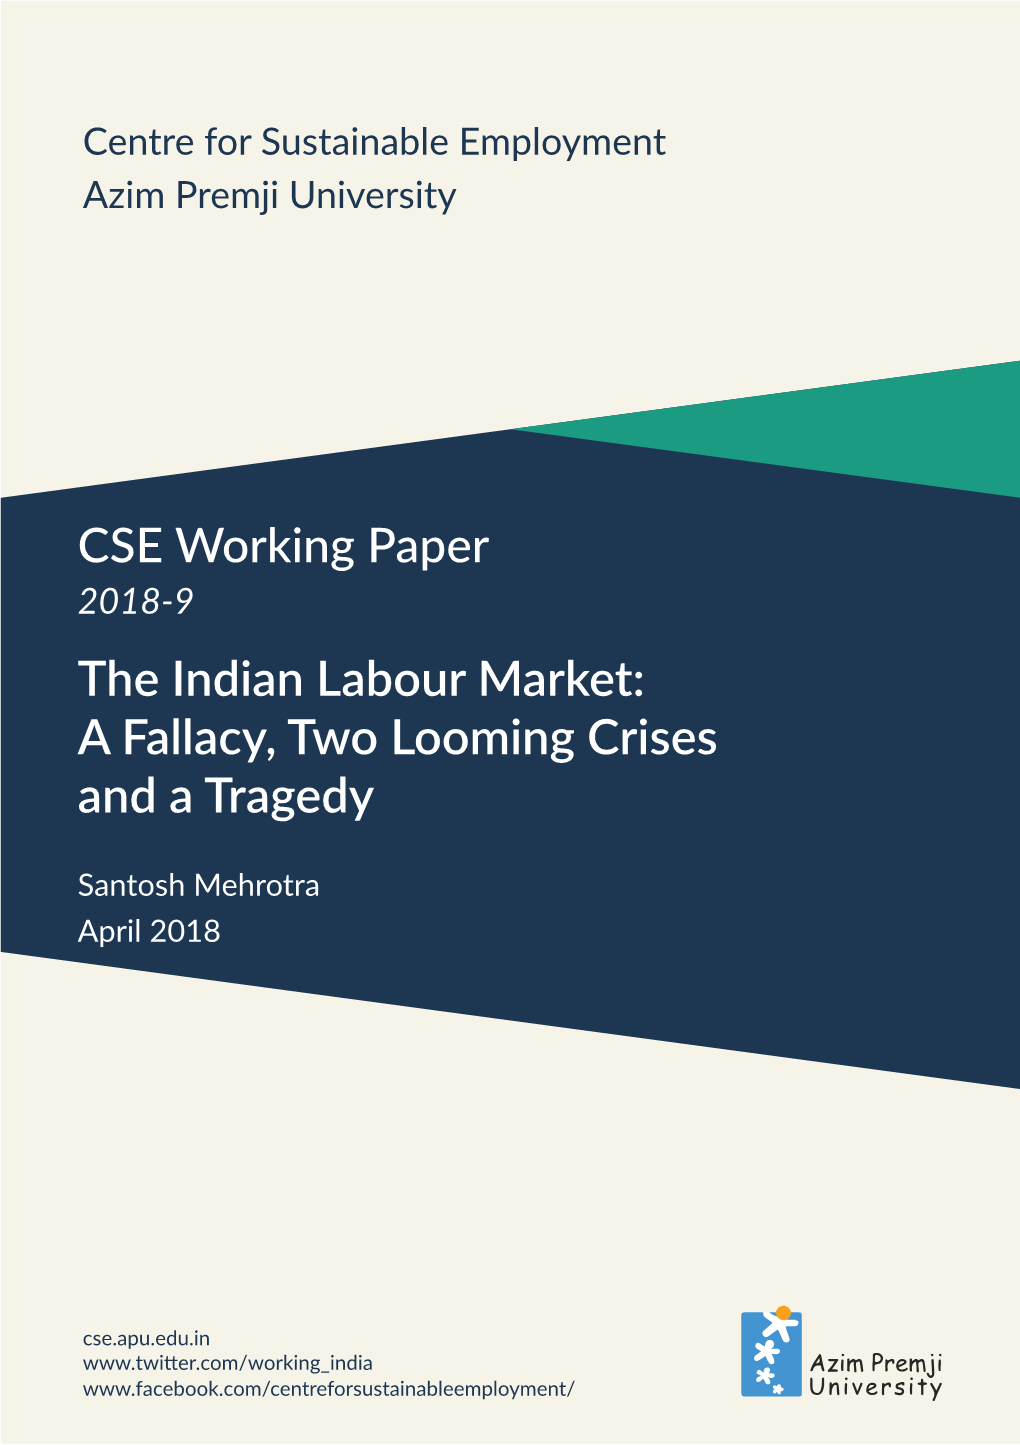 CSE Working Paper the Indian Labour Market